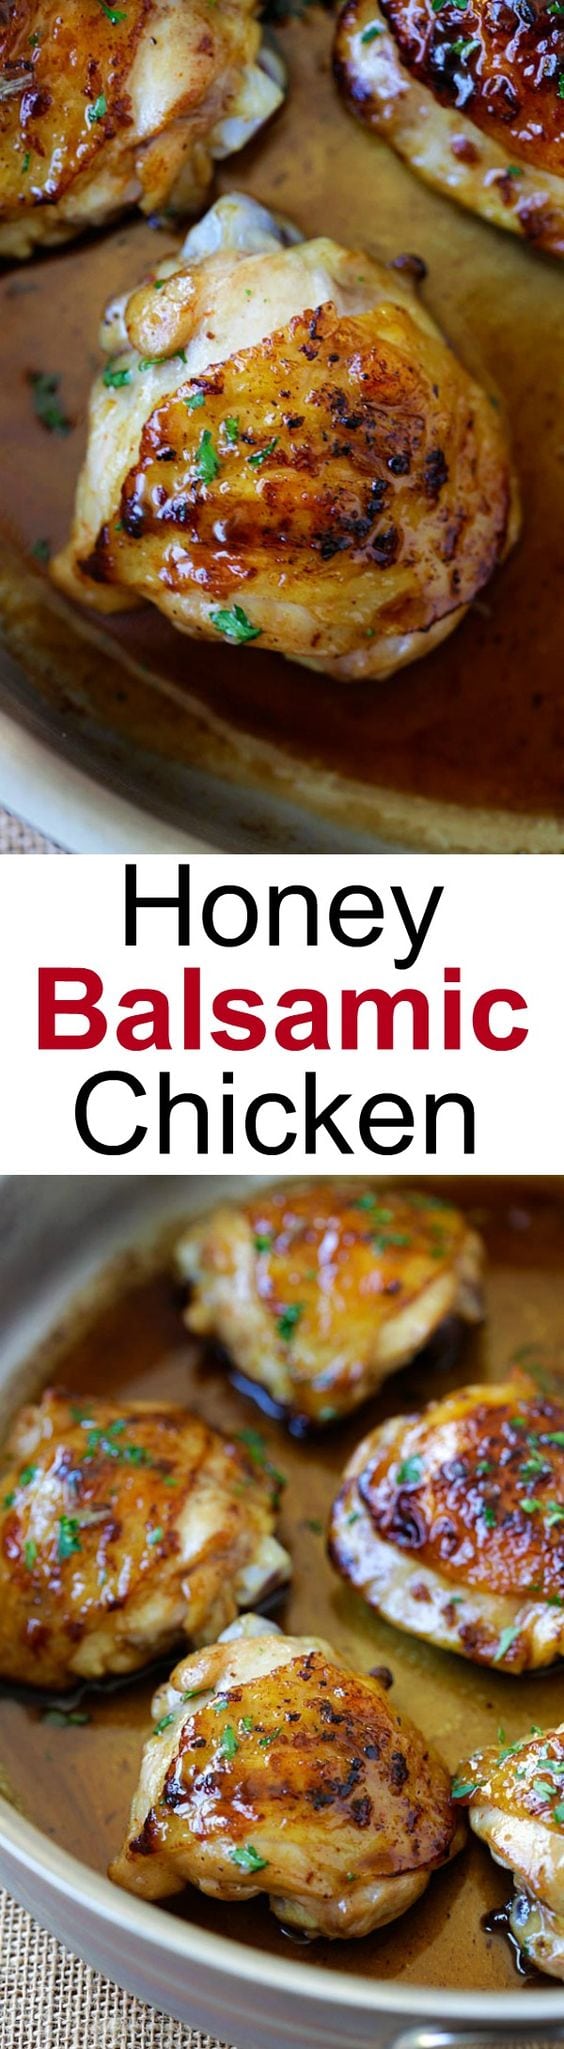 Honey Balsamic Chicken – the easiest skillet chicken with sweet and savory honey balsamic sauce. Homemade chicken dinner is so good with this recipe | rasamalaysia.com